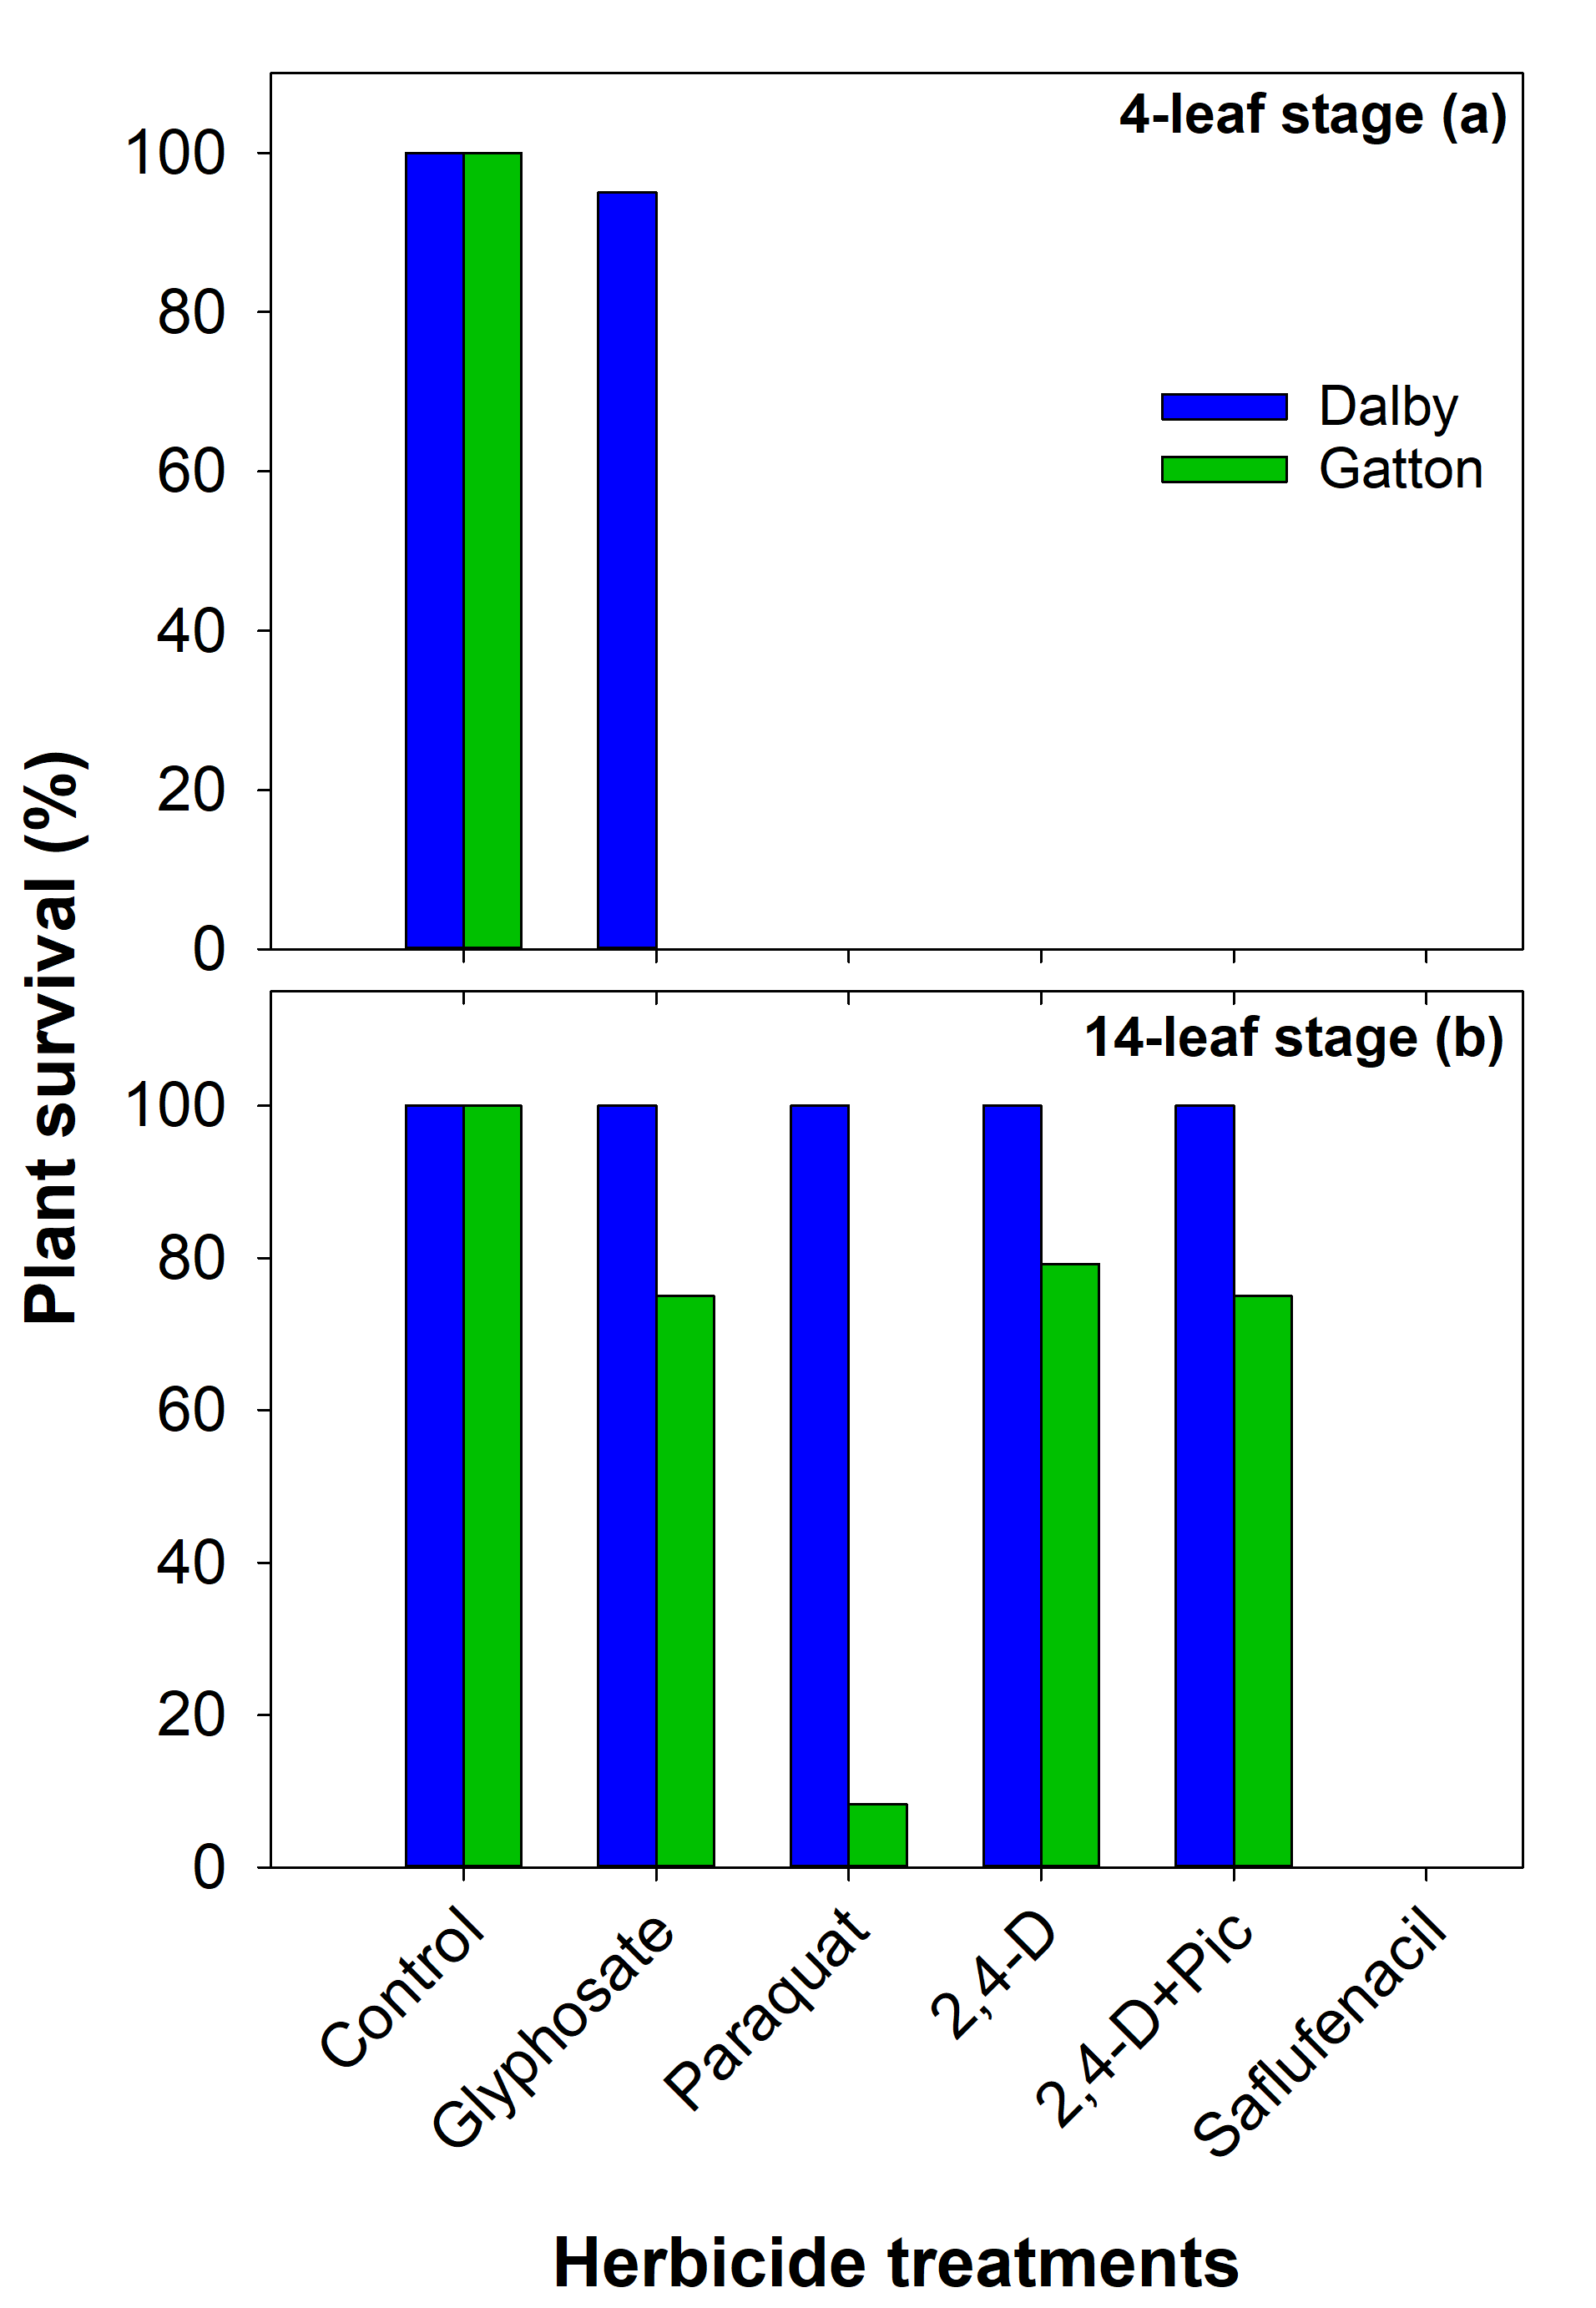 These two bar graphs show the effect of different herbicide treatments on survival (% of the non-treated control treatment) of the Dalby and Gatton populations of tall fleabane when applied at 4-leaf (a) and 14-leaf stage (b).